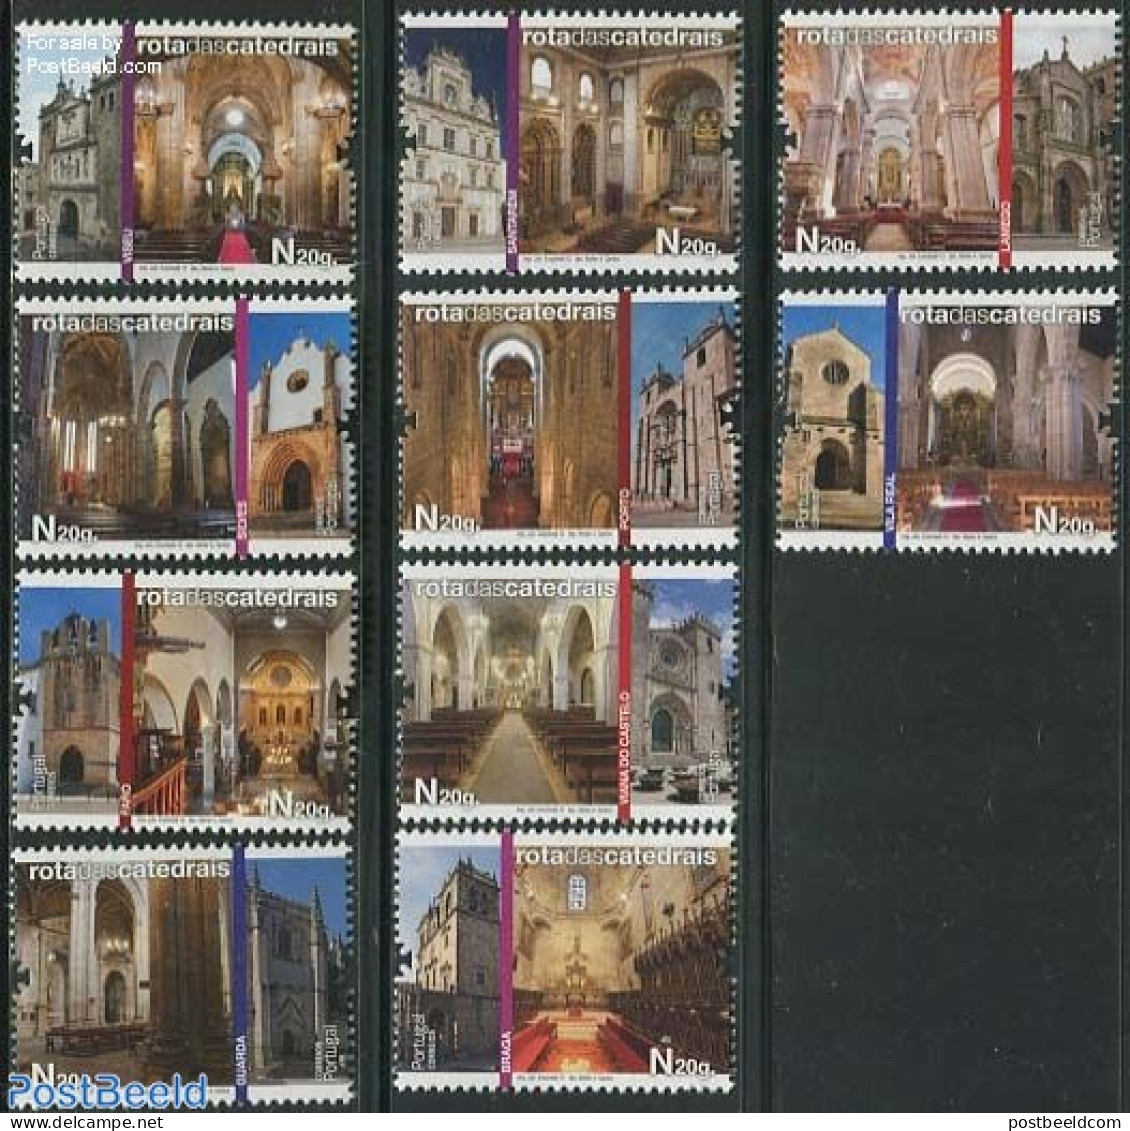 Portugal 2012 Cathedrals 10v, Mint NH, Religion - Churches, Temples, Mosques, Synagogues - Nuovi